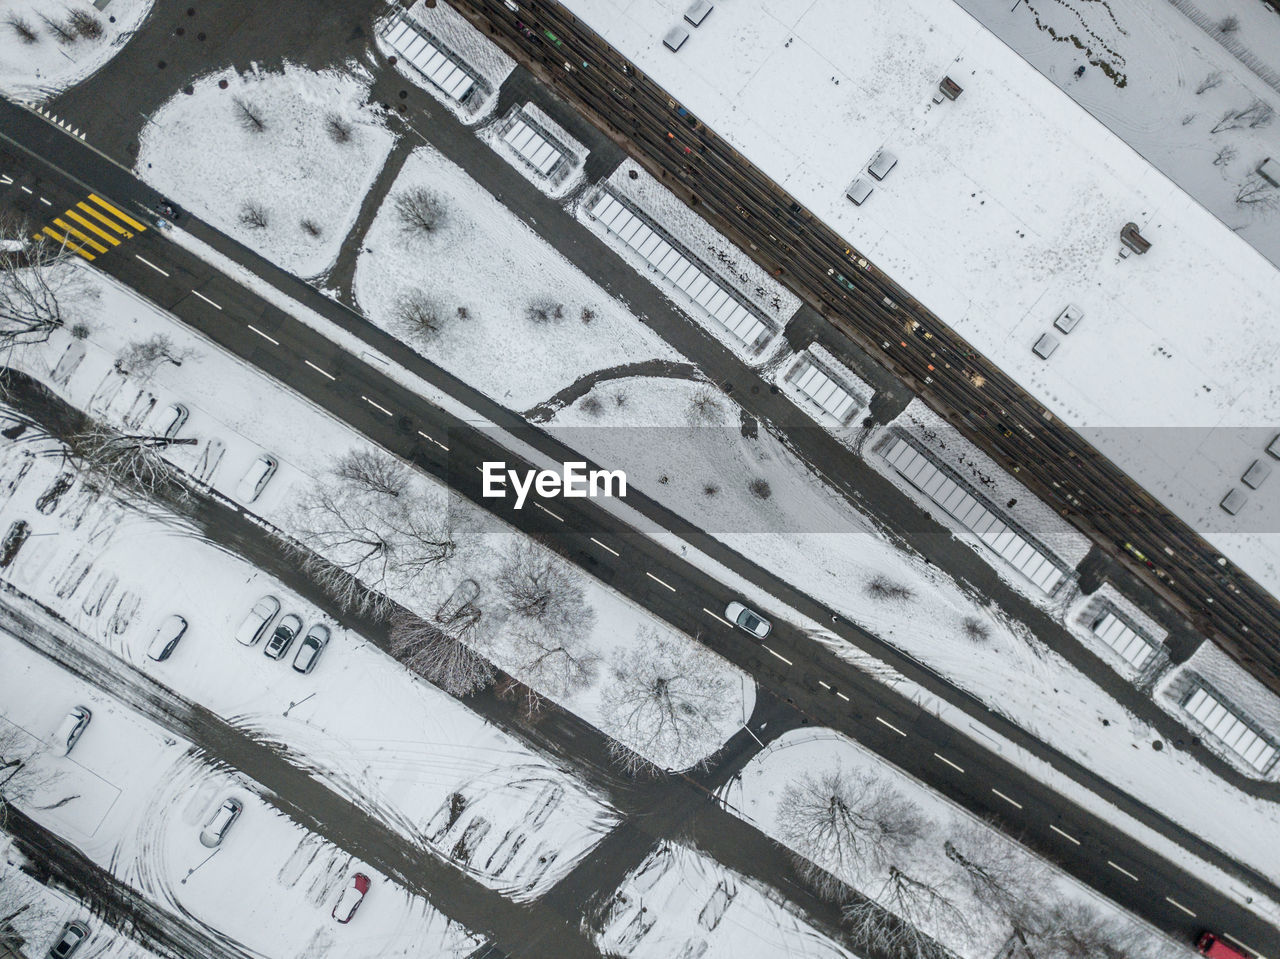 HIGH ANGLE VIEW OF SNOW ON RAILROAD TRACKS